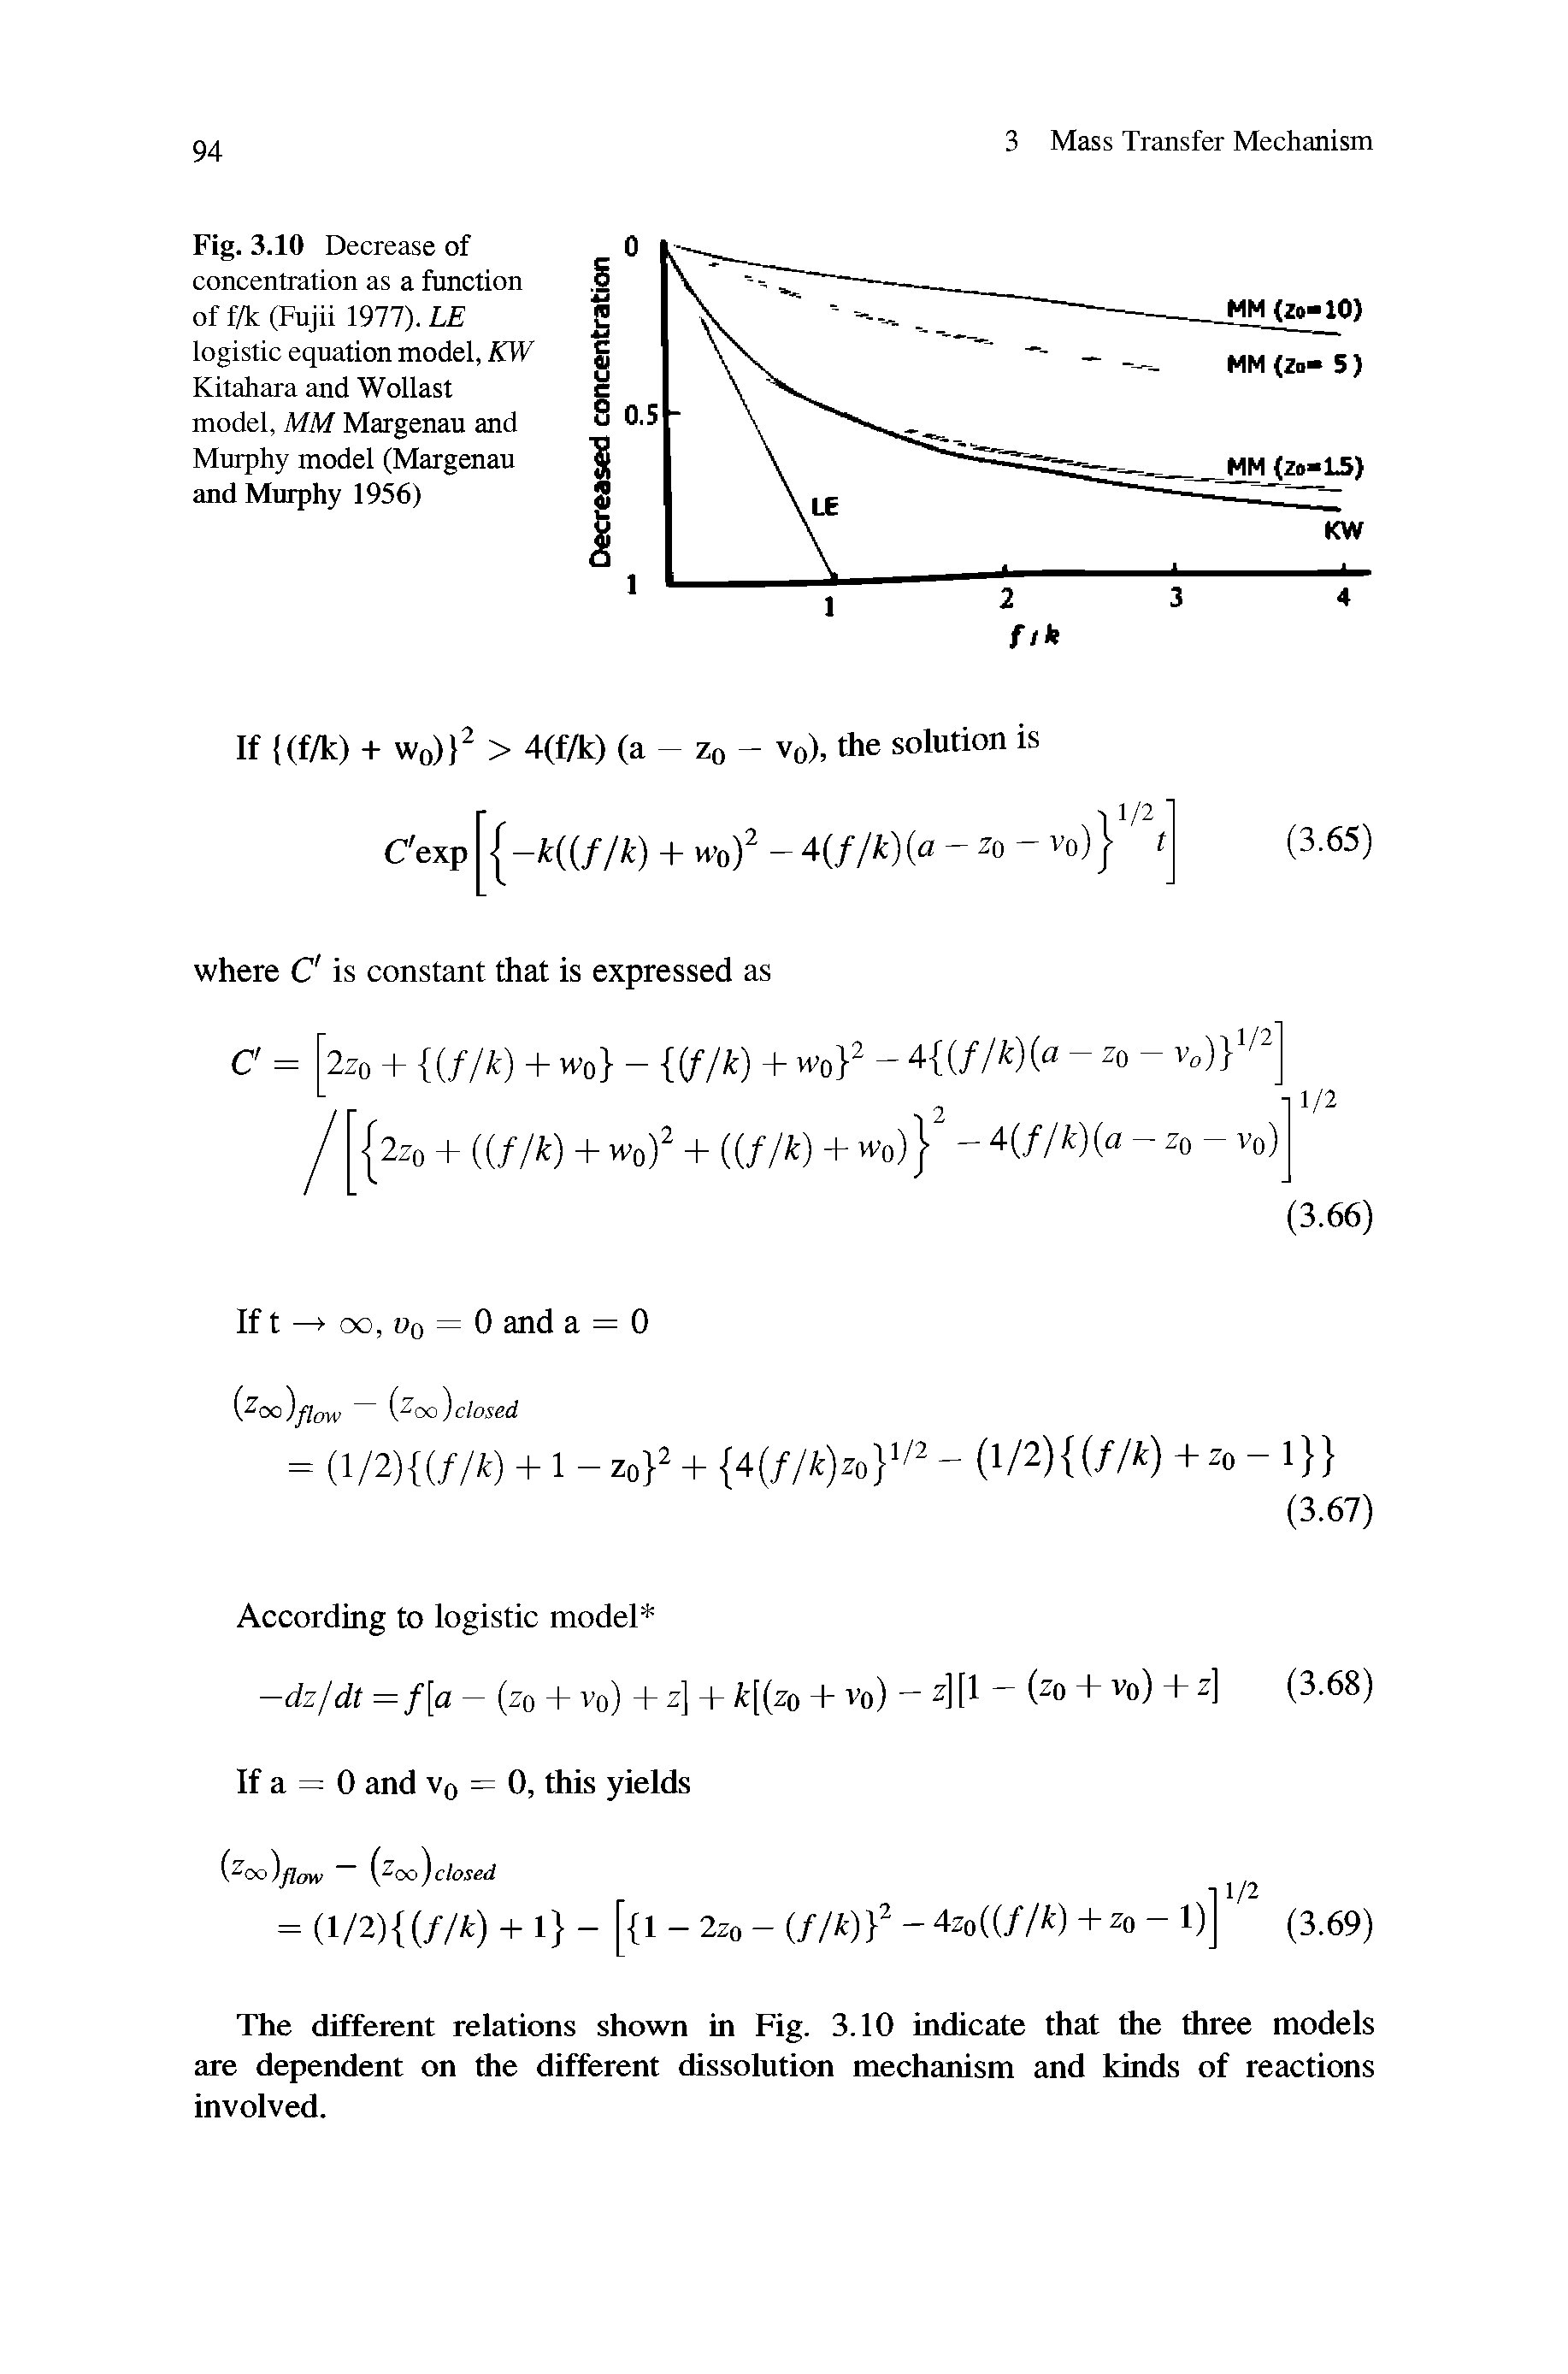 Fig. 3.10 Decrease of concentration as a function of f/k (Fujii 1977). LE logistic equation model, KW Kitahara and Wollast model, MM Margenau and Murphy model (Margenau and Murphy 1956)...